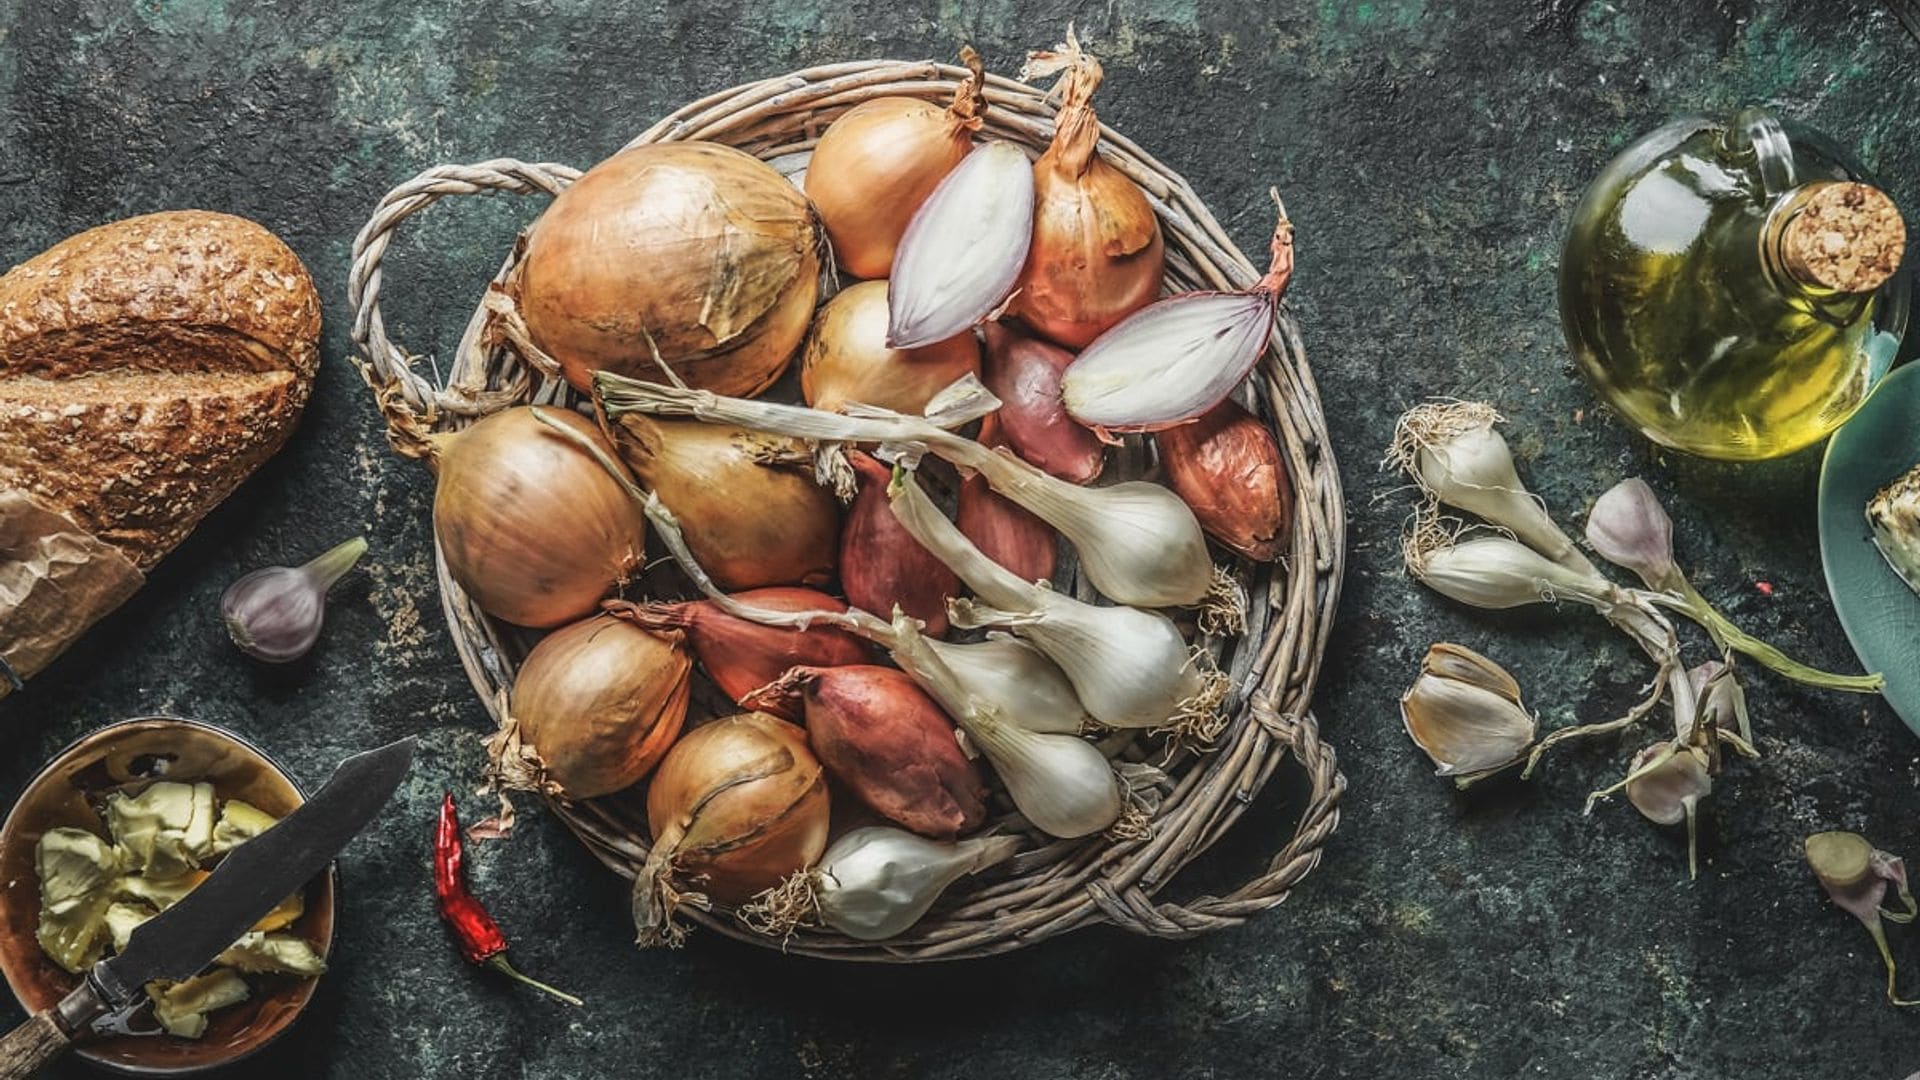 The diversity of onions: Types and how we can make the most of them